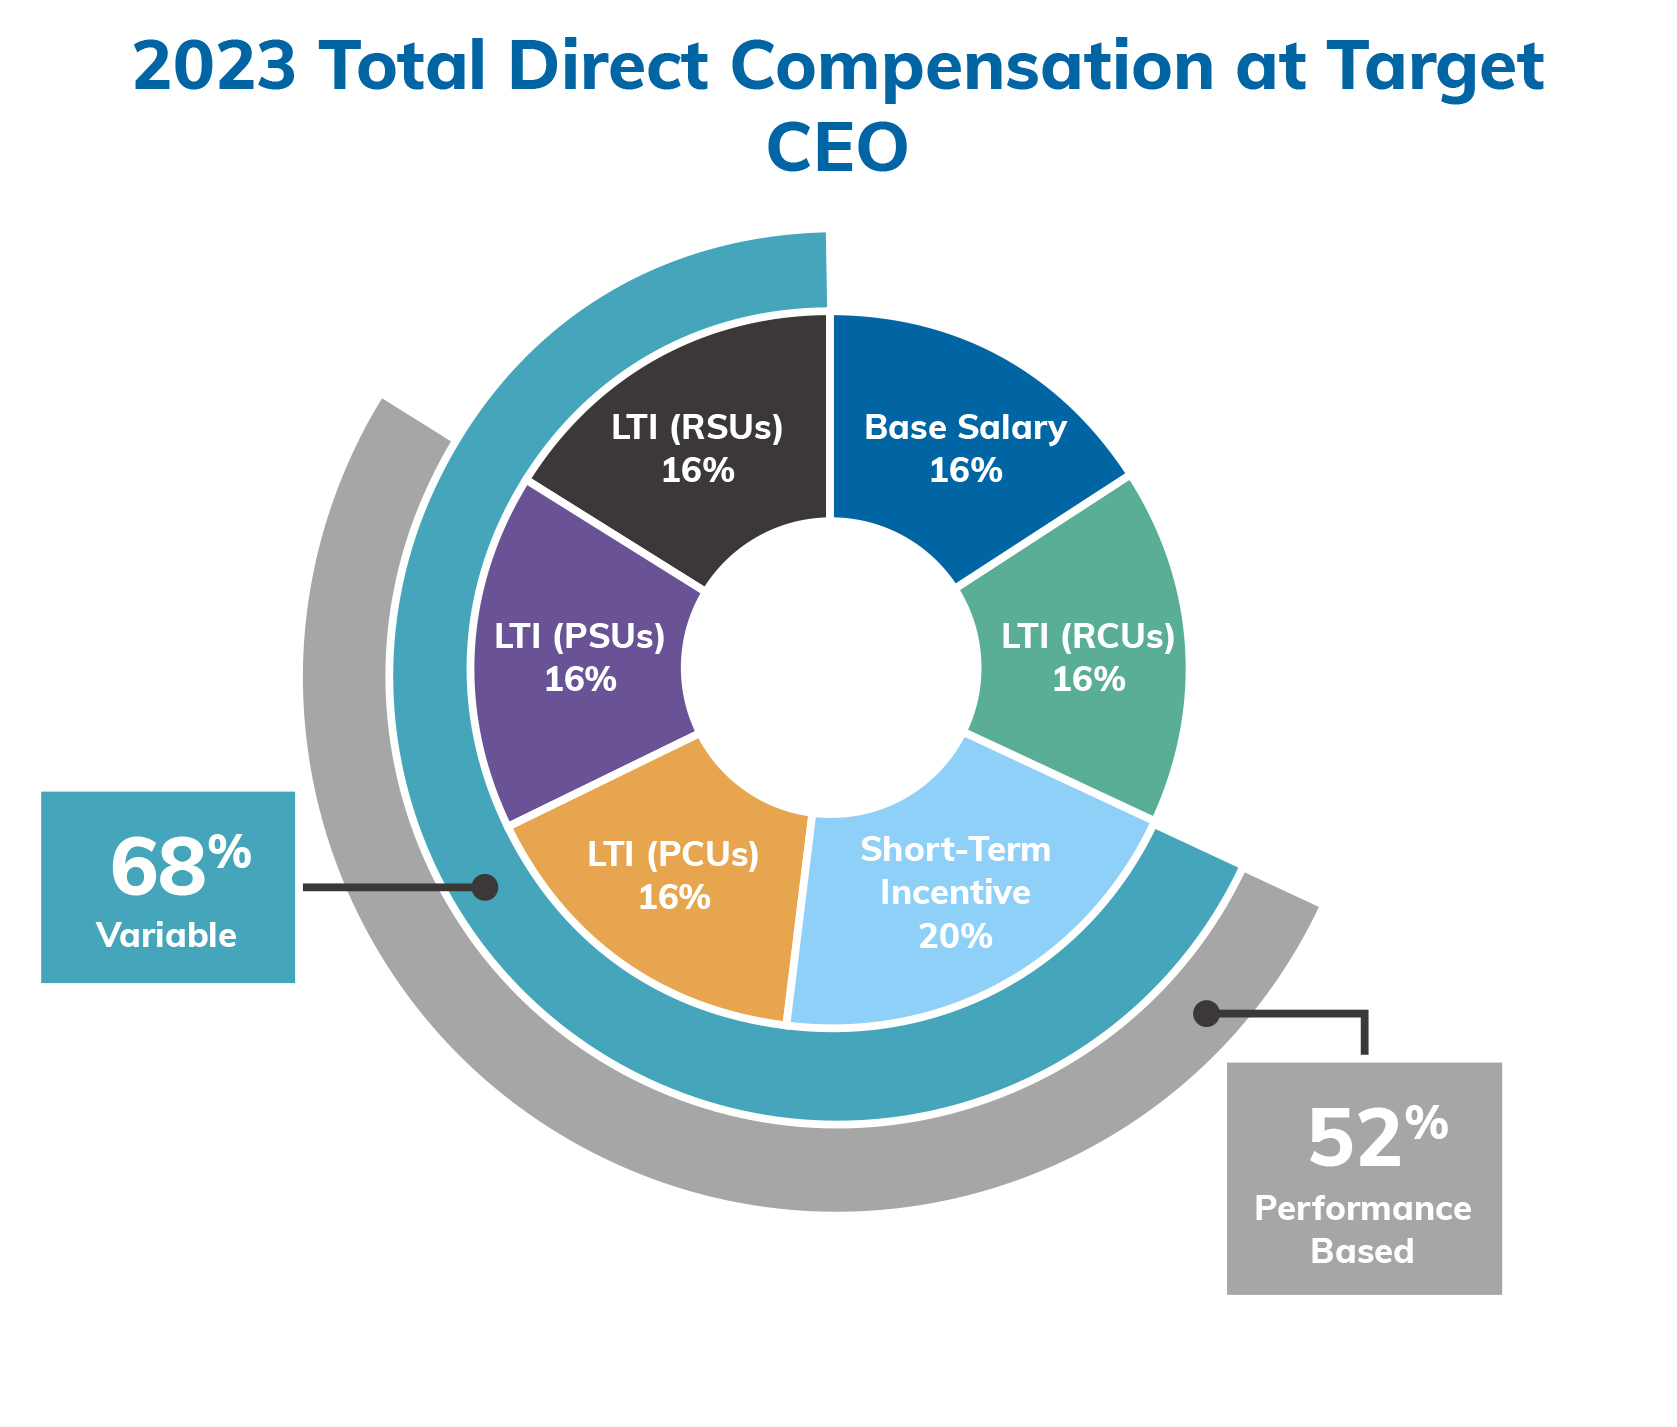 2023 Total Direct Compensation_CEO-02.jpg